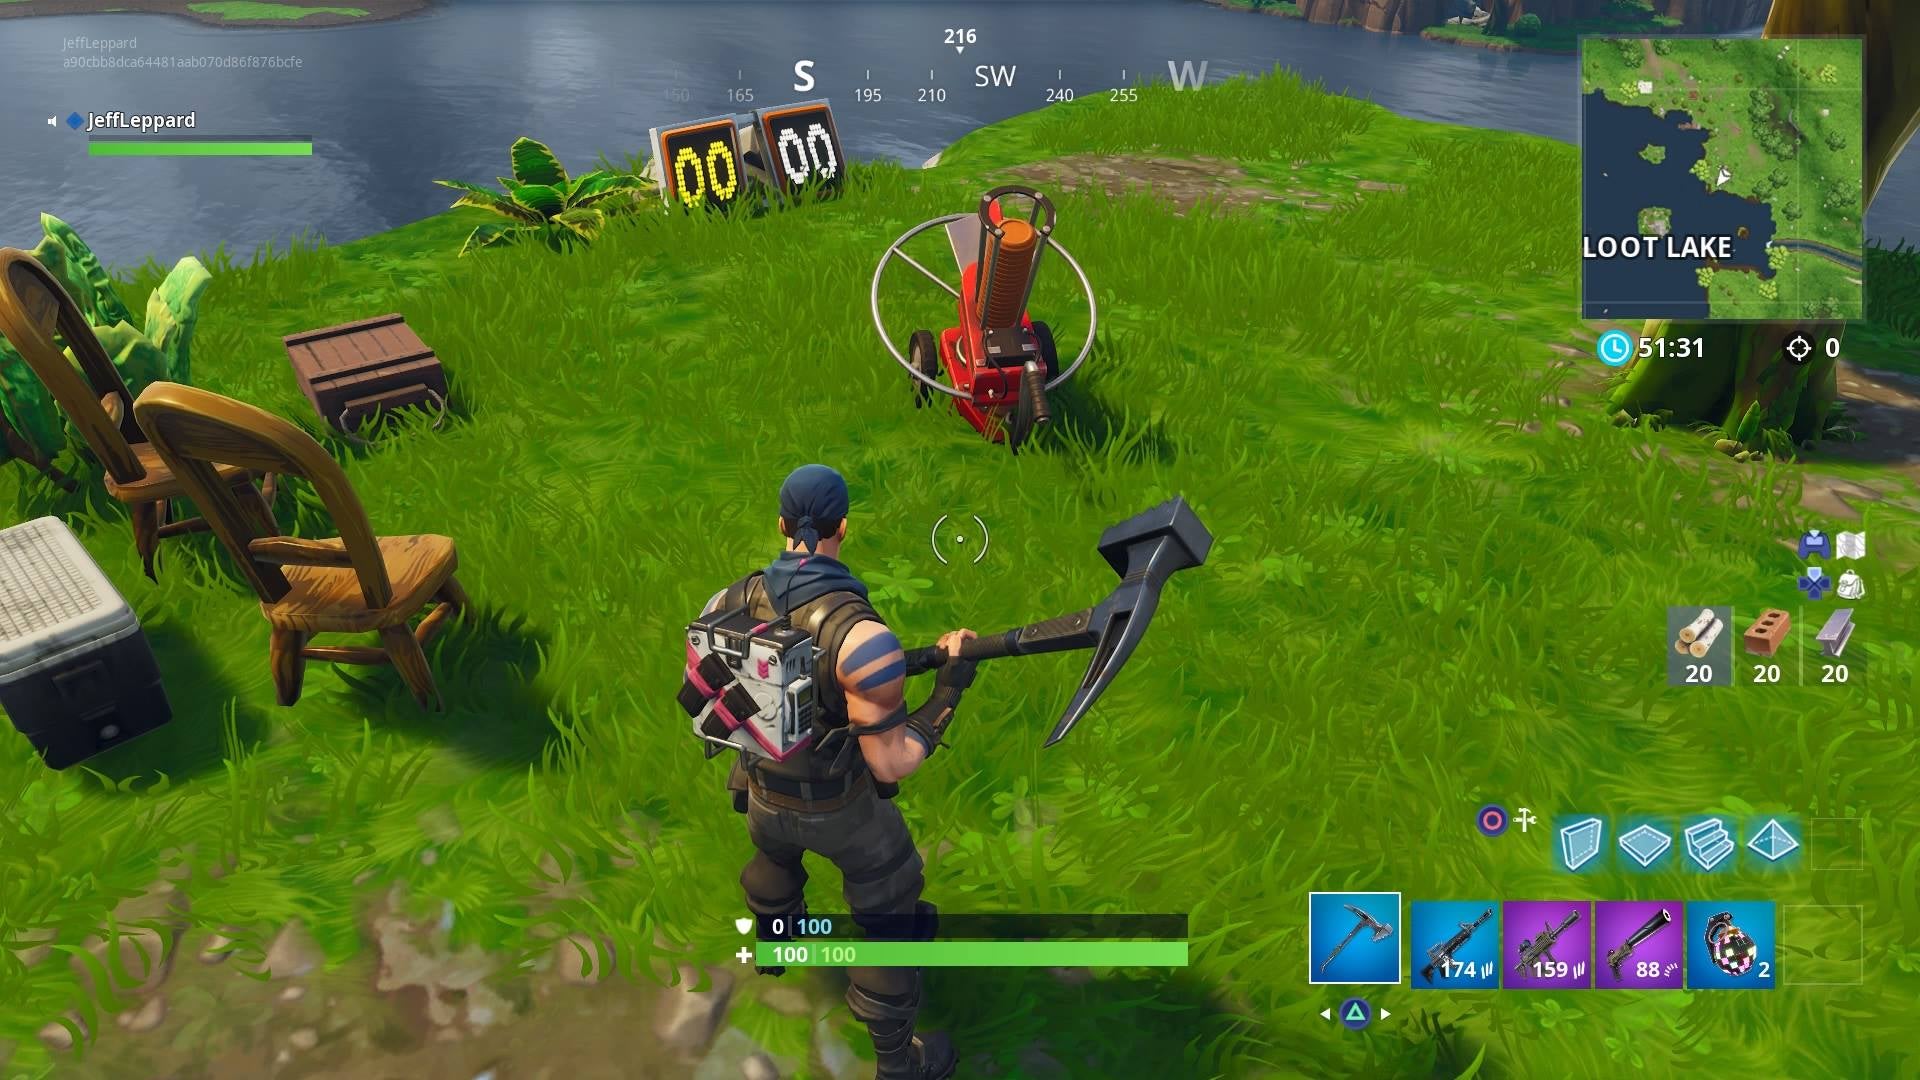 Image for Fortnite: shoot a clay pigeon at different locations - where are all the clay pigeons?